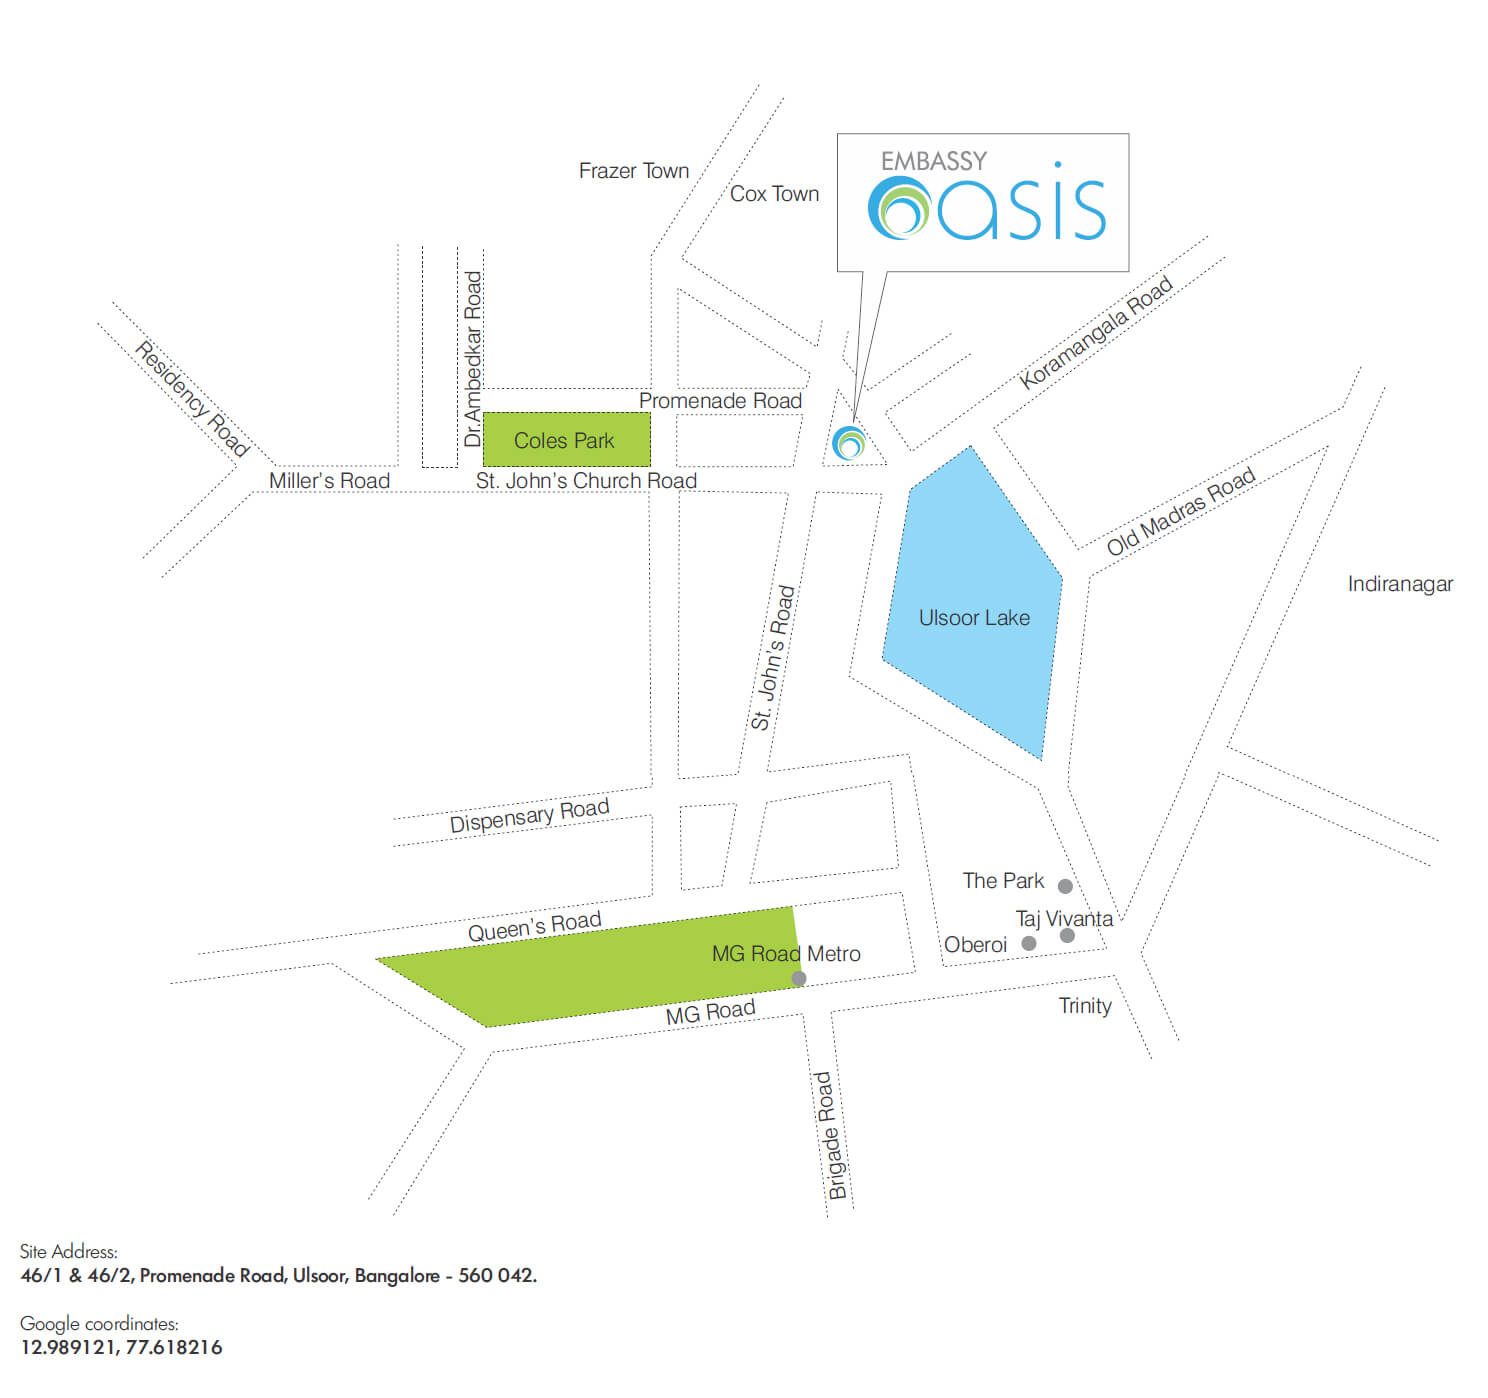 Embassy Oasis Location Map